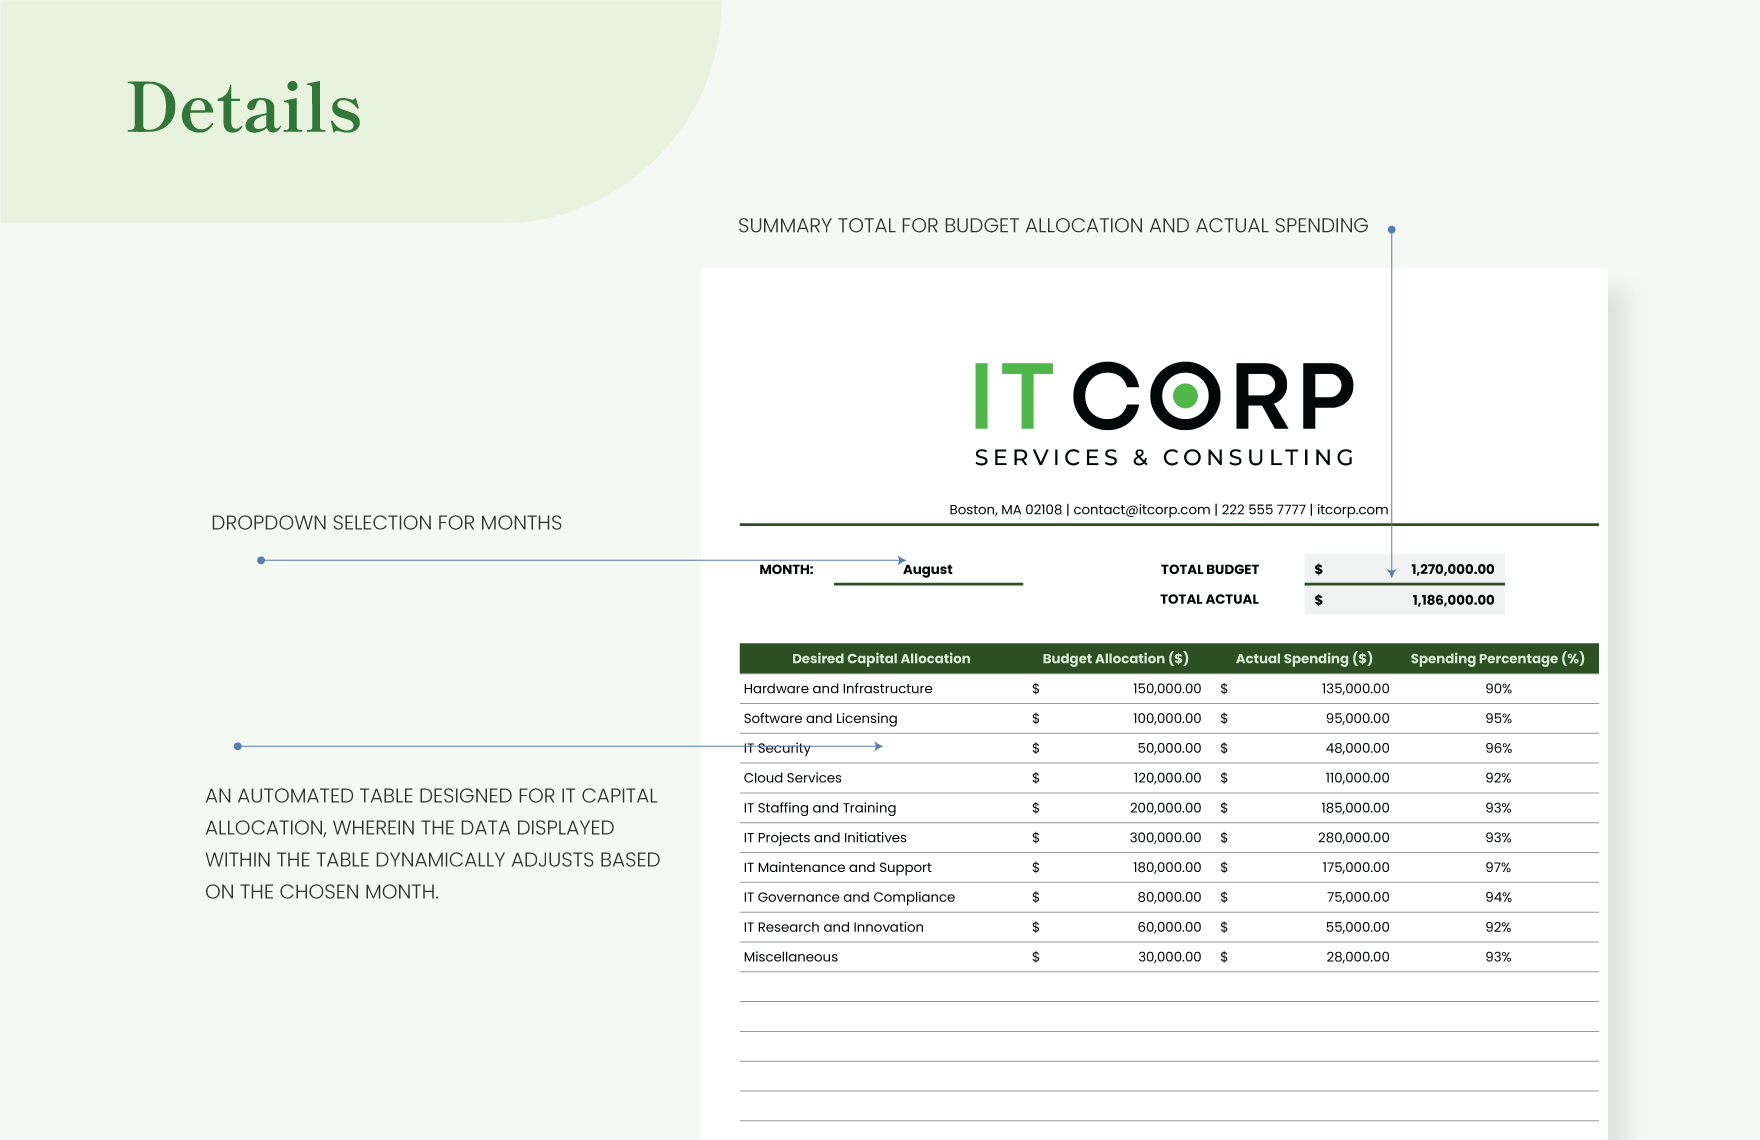 IT Capital Allocation Sheet Template